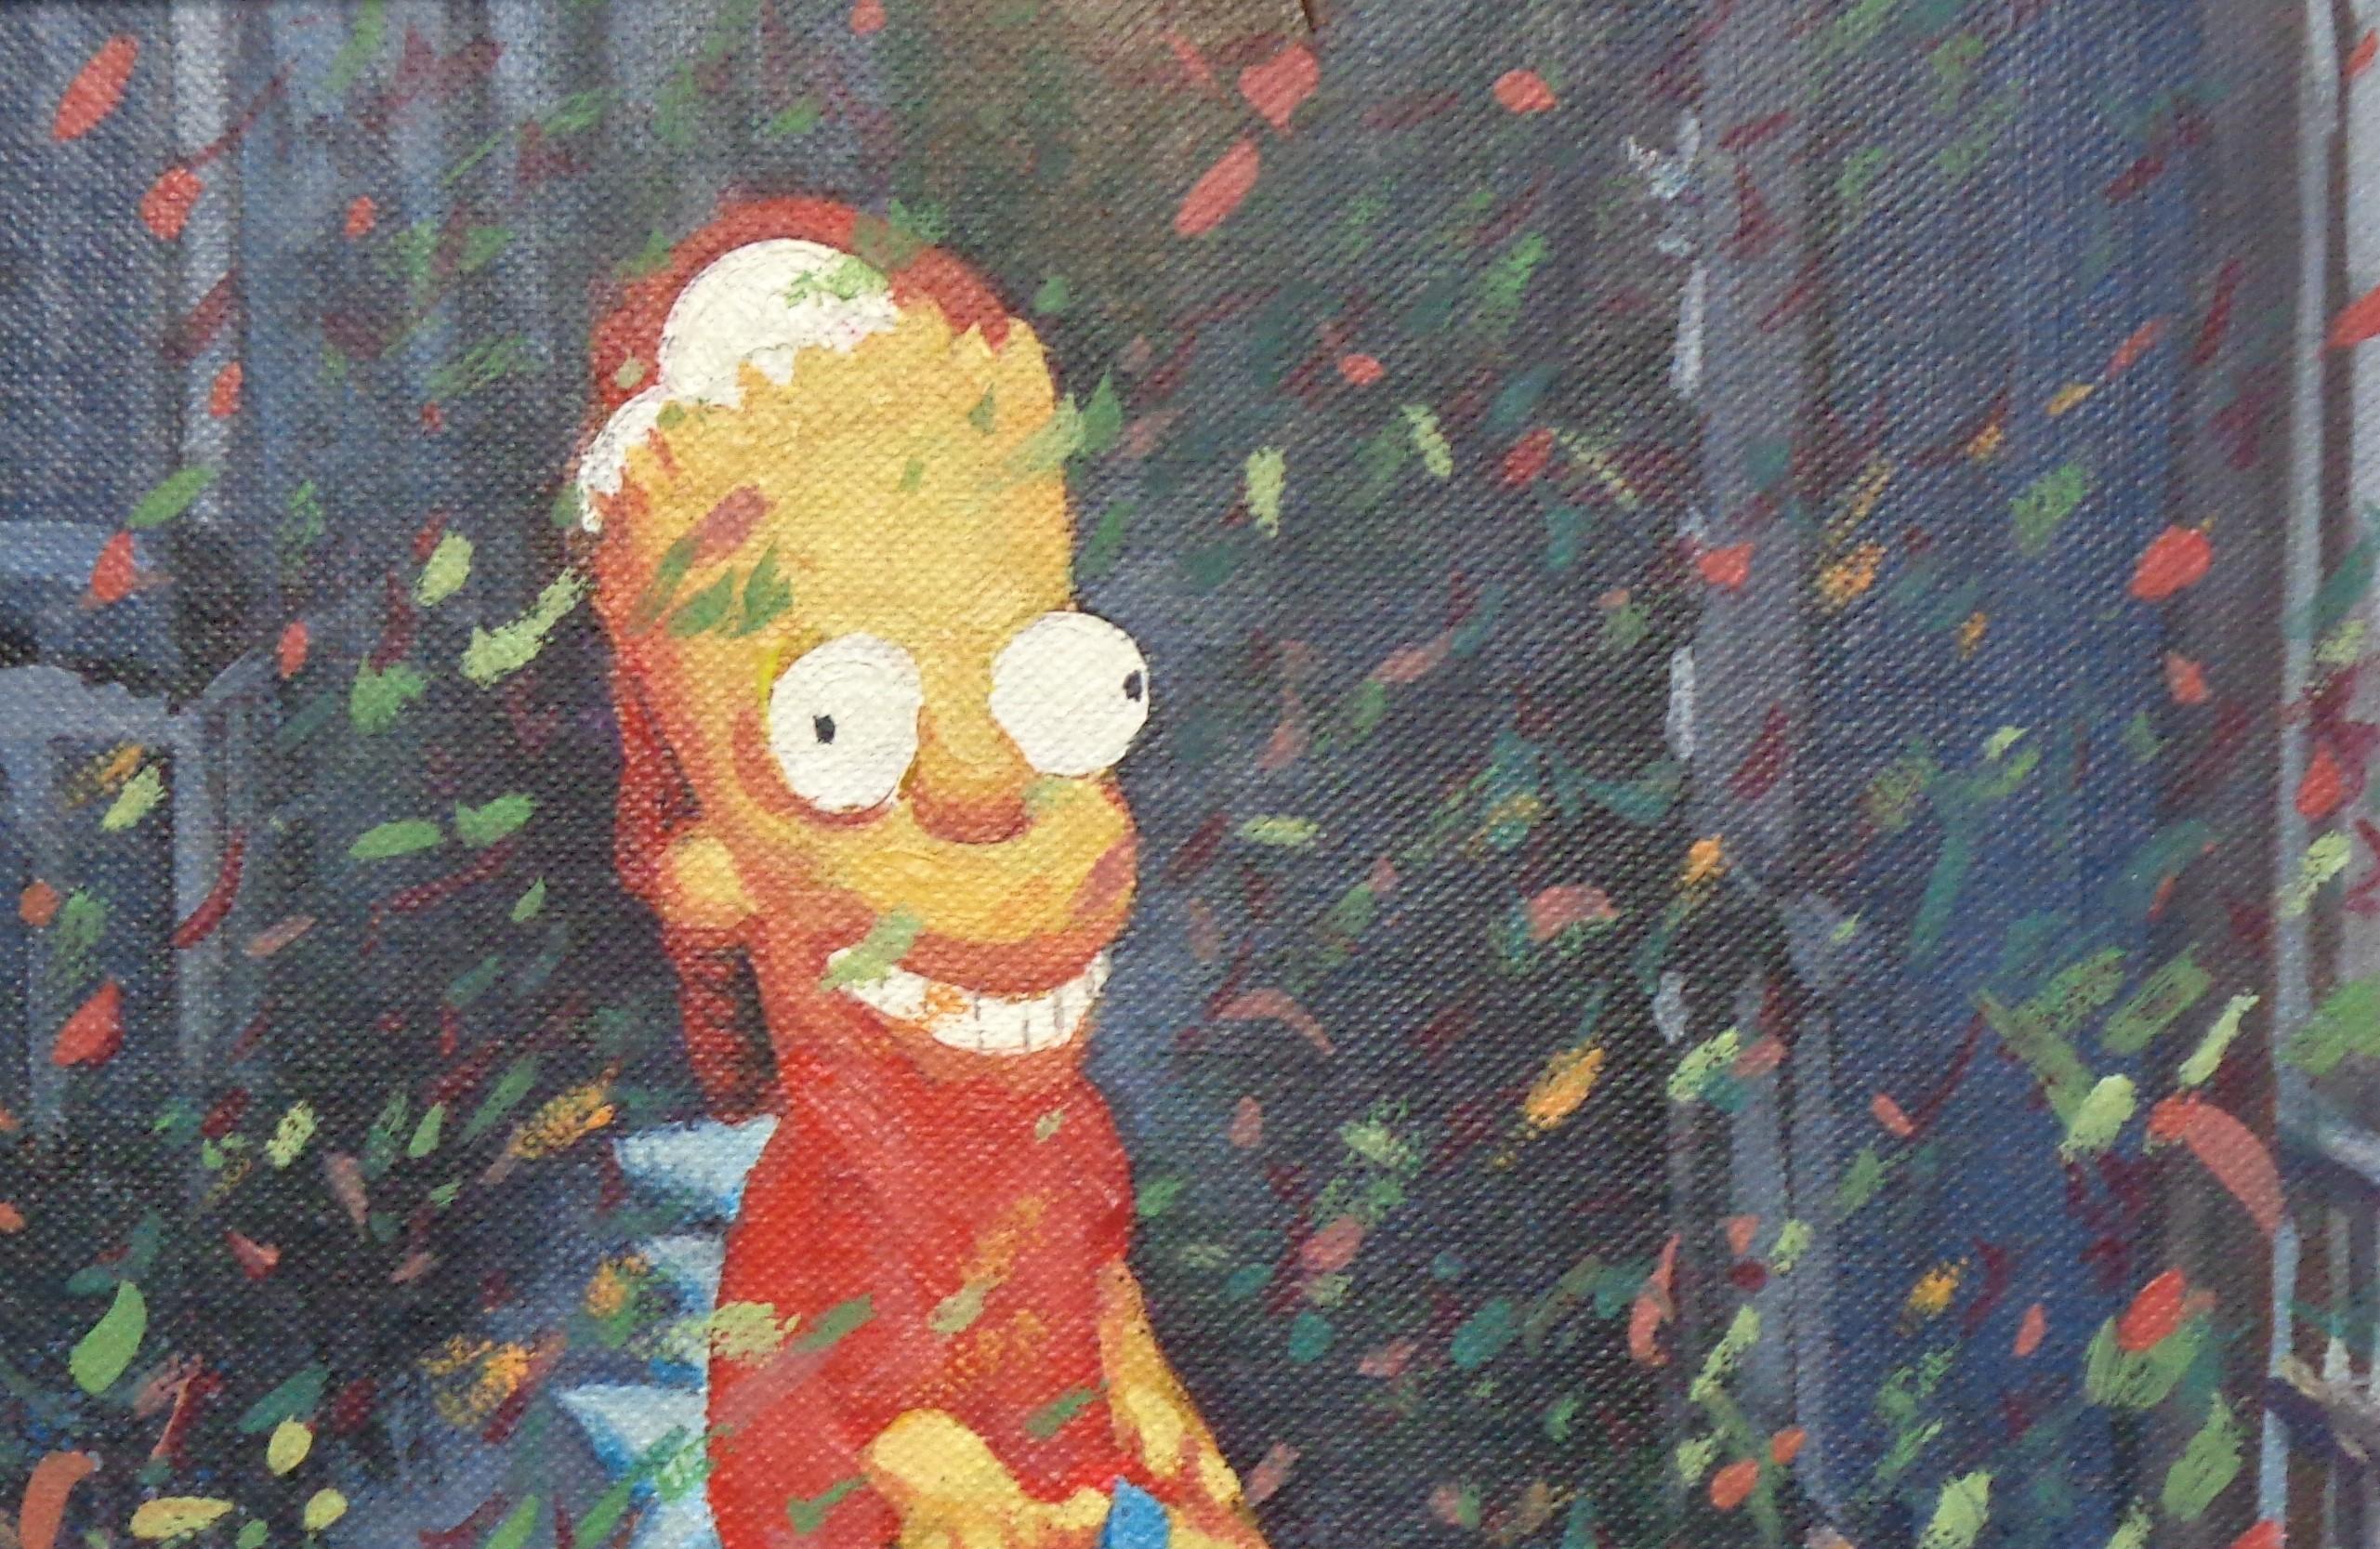   NYC Landscape Oil Painting Michael Budden Macy's Parade Series Bart Simpson 2